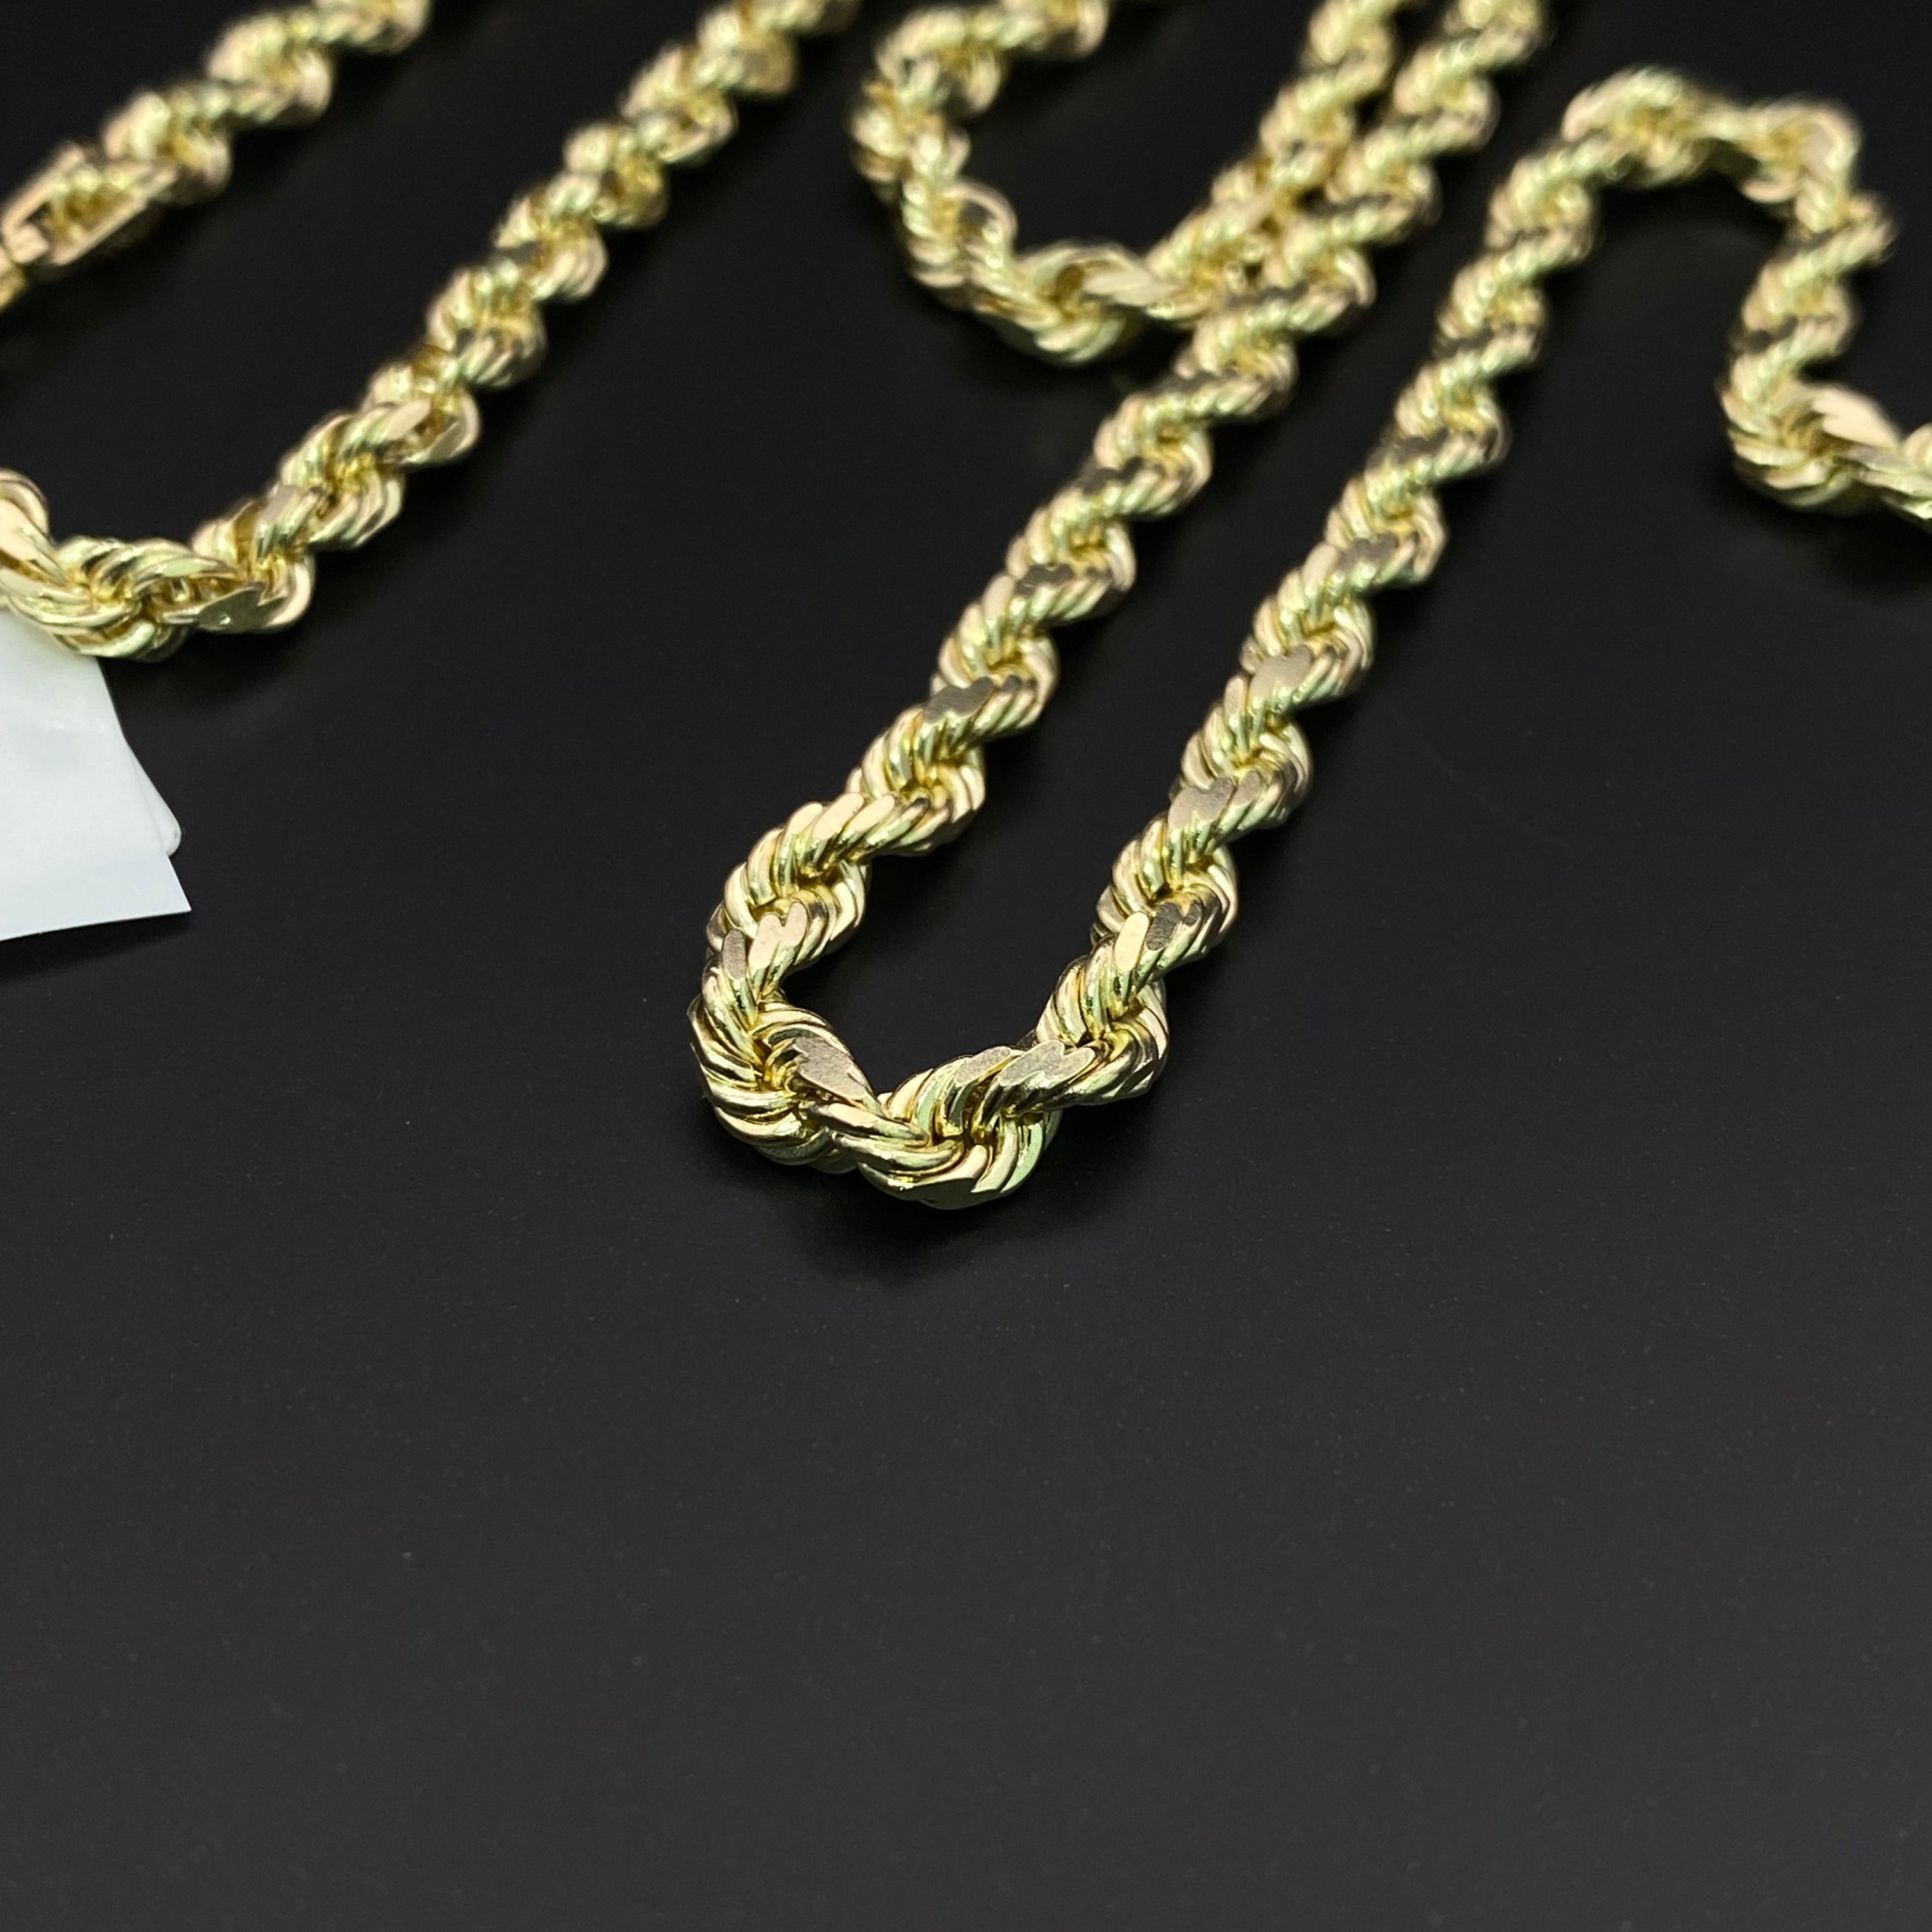 10K Yellow Gold Rope Chain / 10gr / 4.8mm / 26in